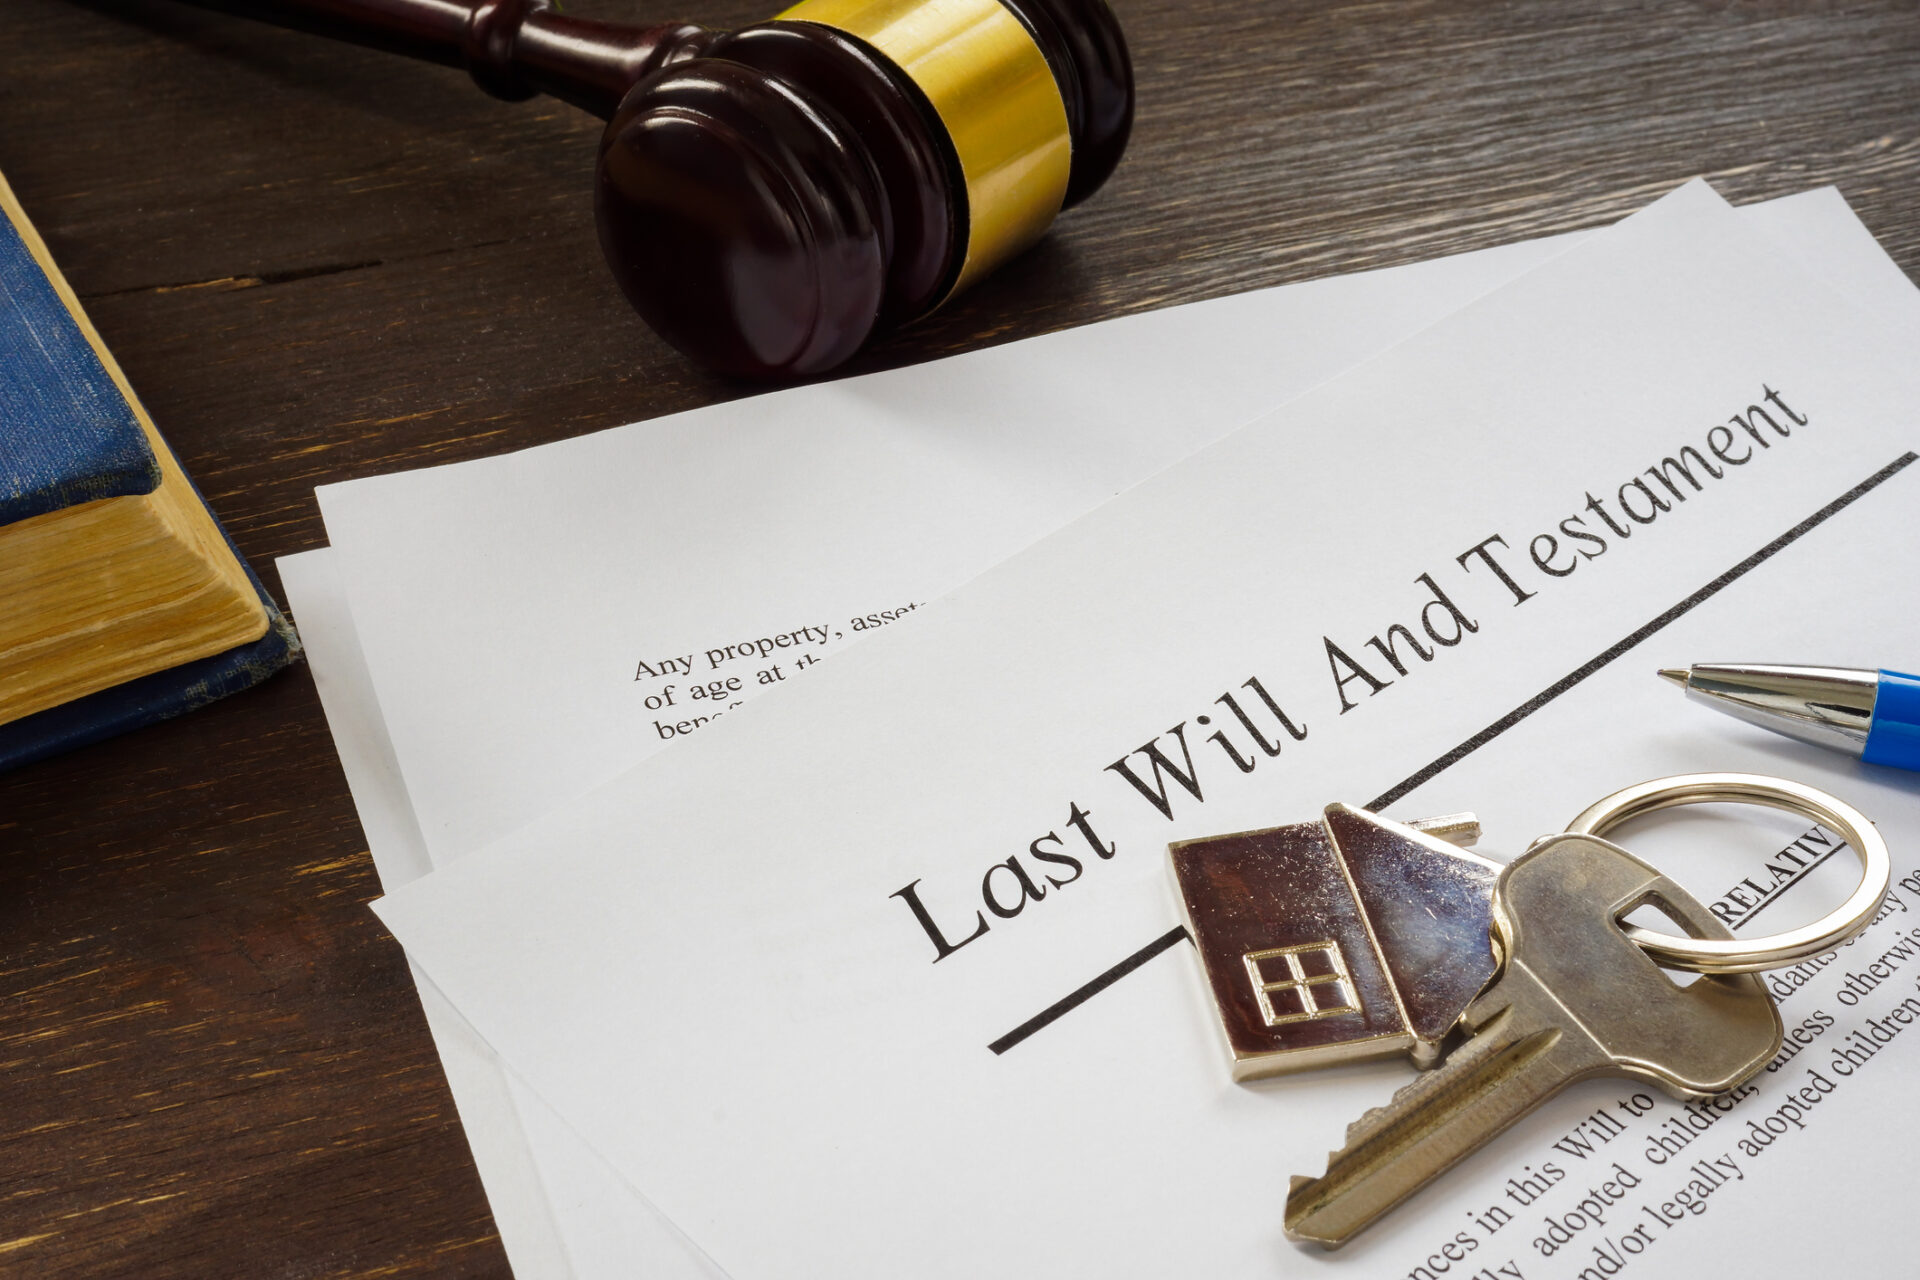 Last will and testament papers and key as symbol of property.